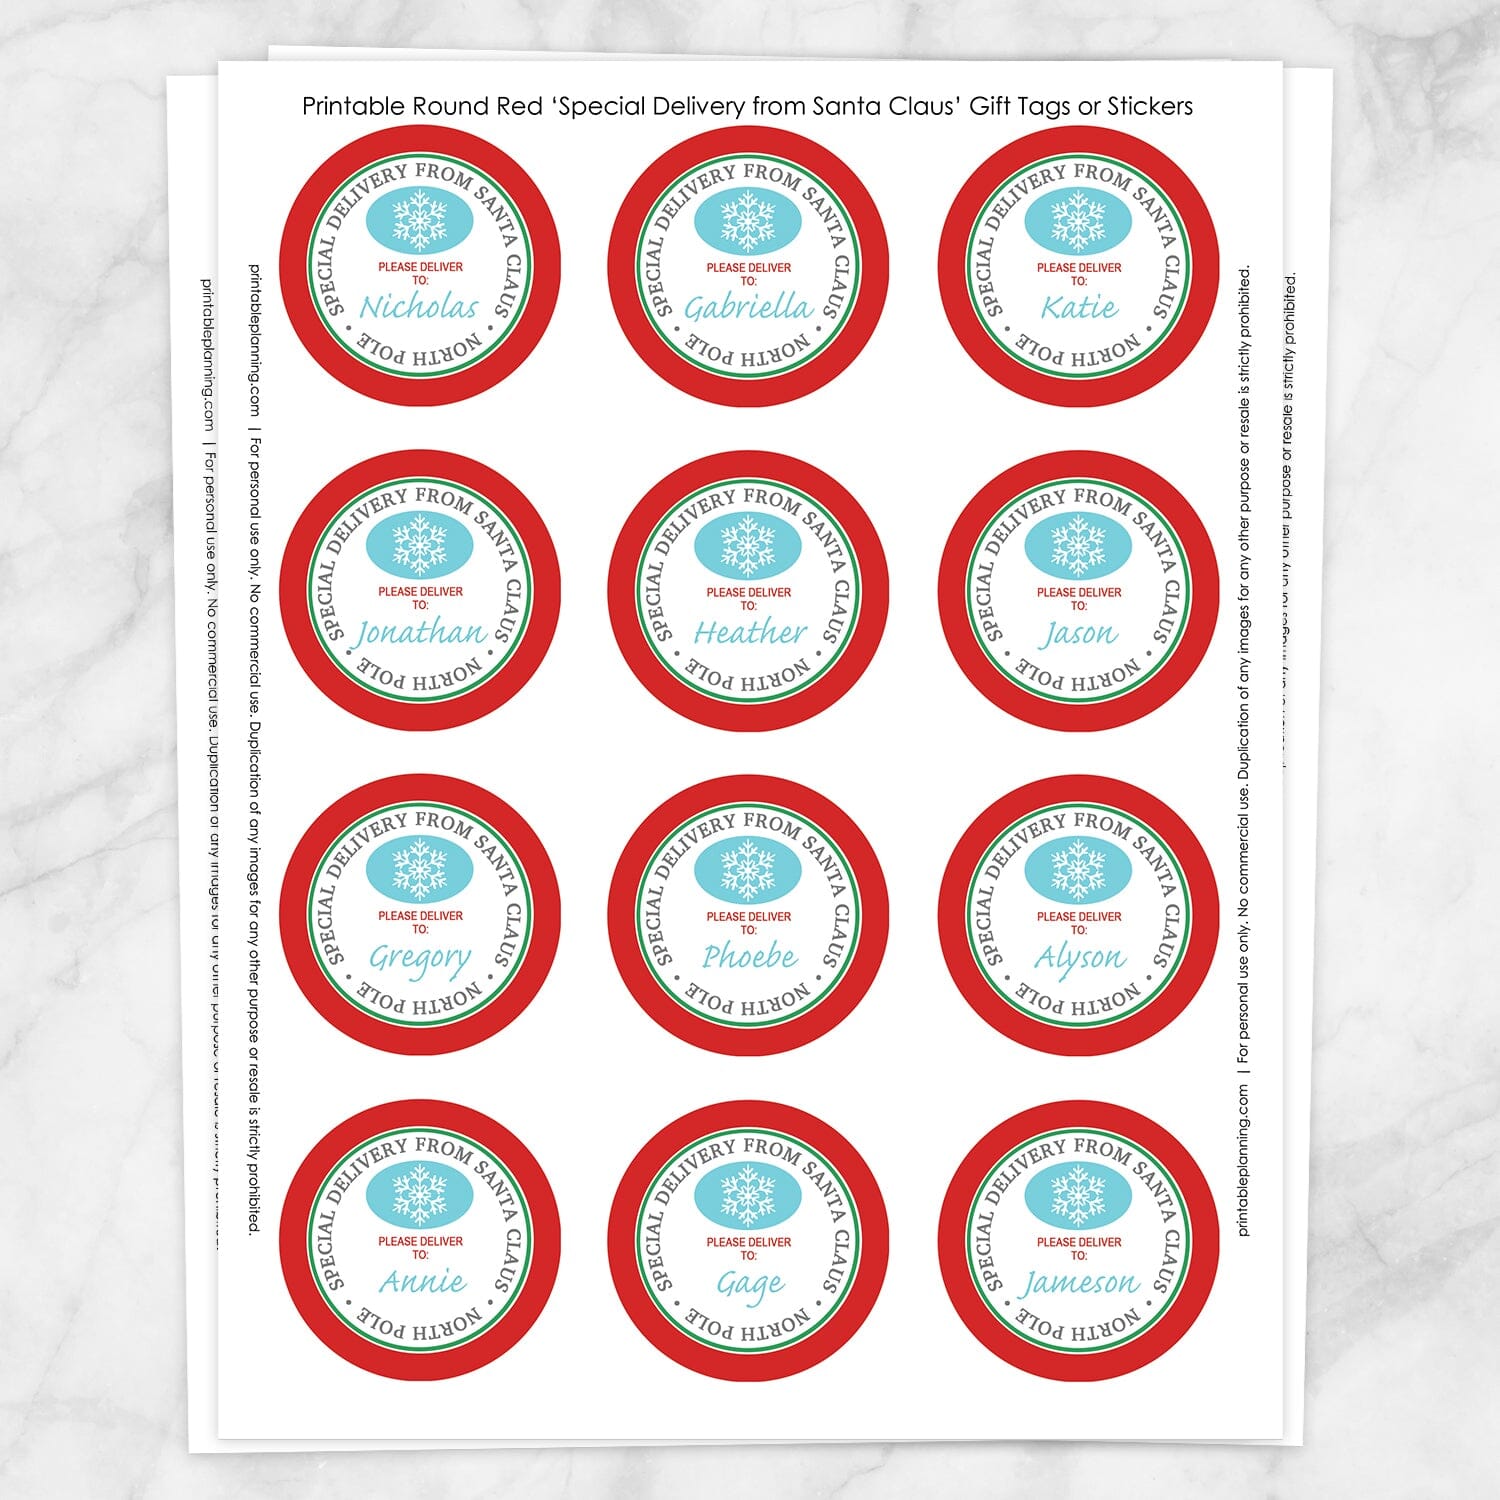 Printable Special Delivery from Santa Claus - Round Personalized Gift Tags or Stickers at Printable Planning. Sheet of 12 stickers.